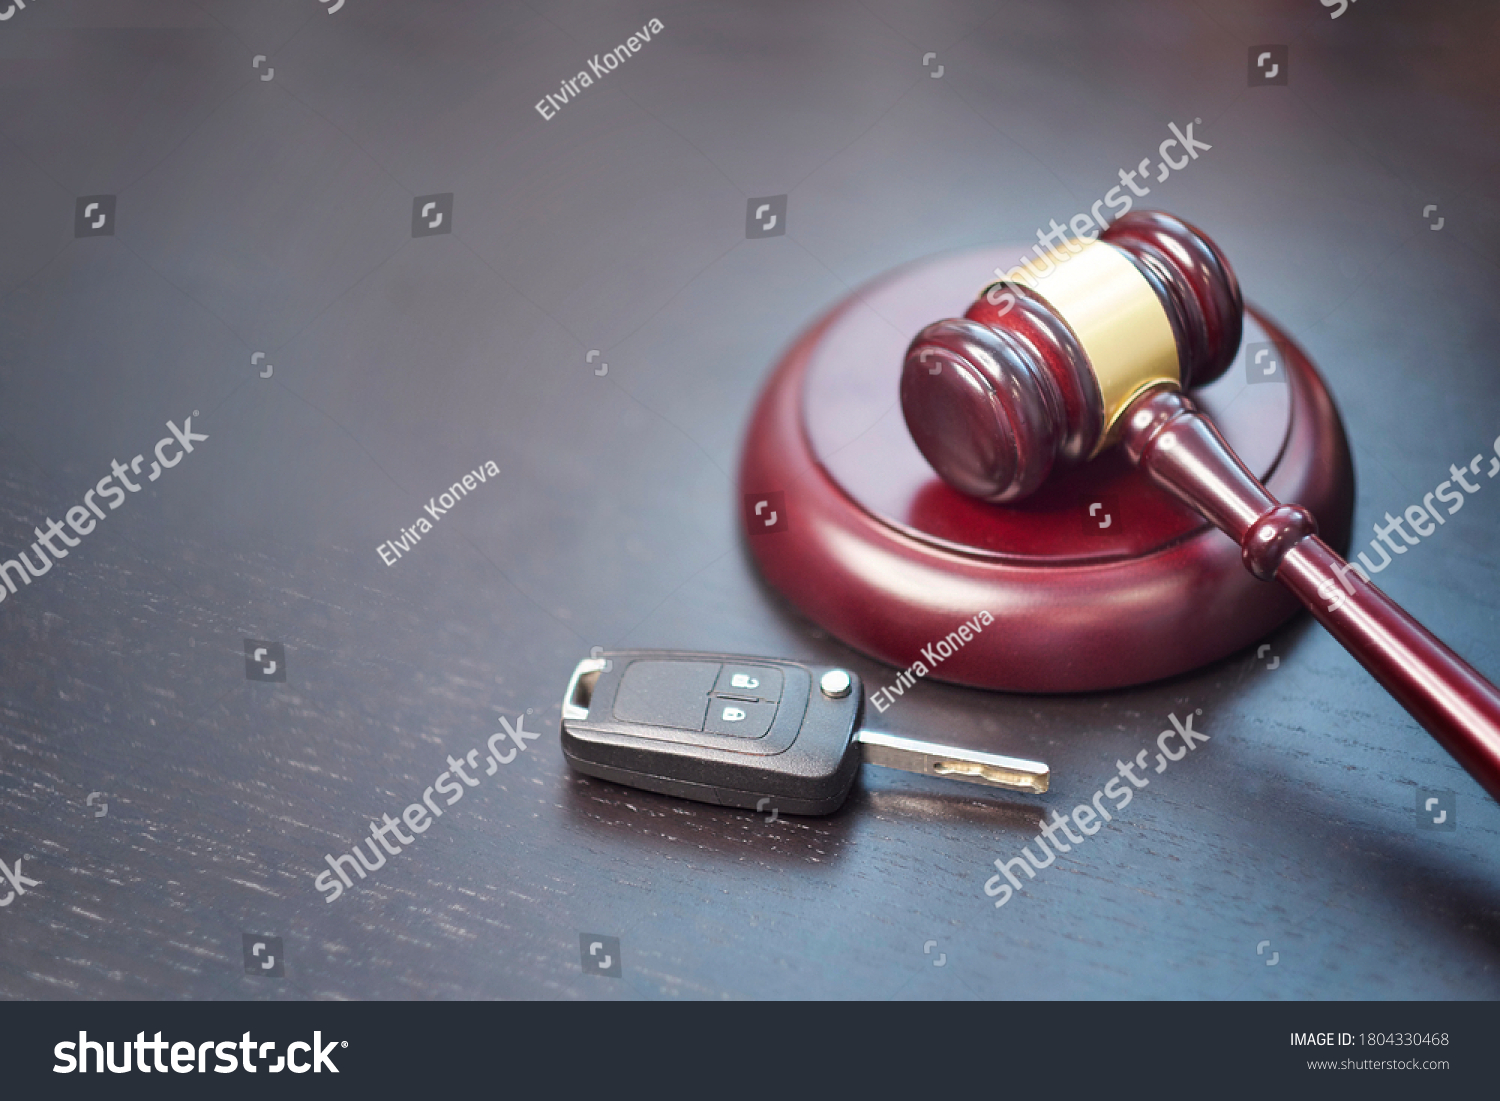 Driver license revocation concept next to the judge hammer. Traffic violation concept by car next to judge hammer. Revocable trust on a dark desk. #1804330468